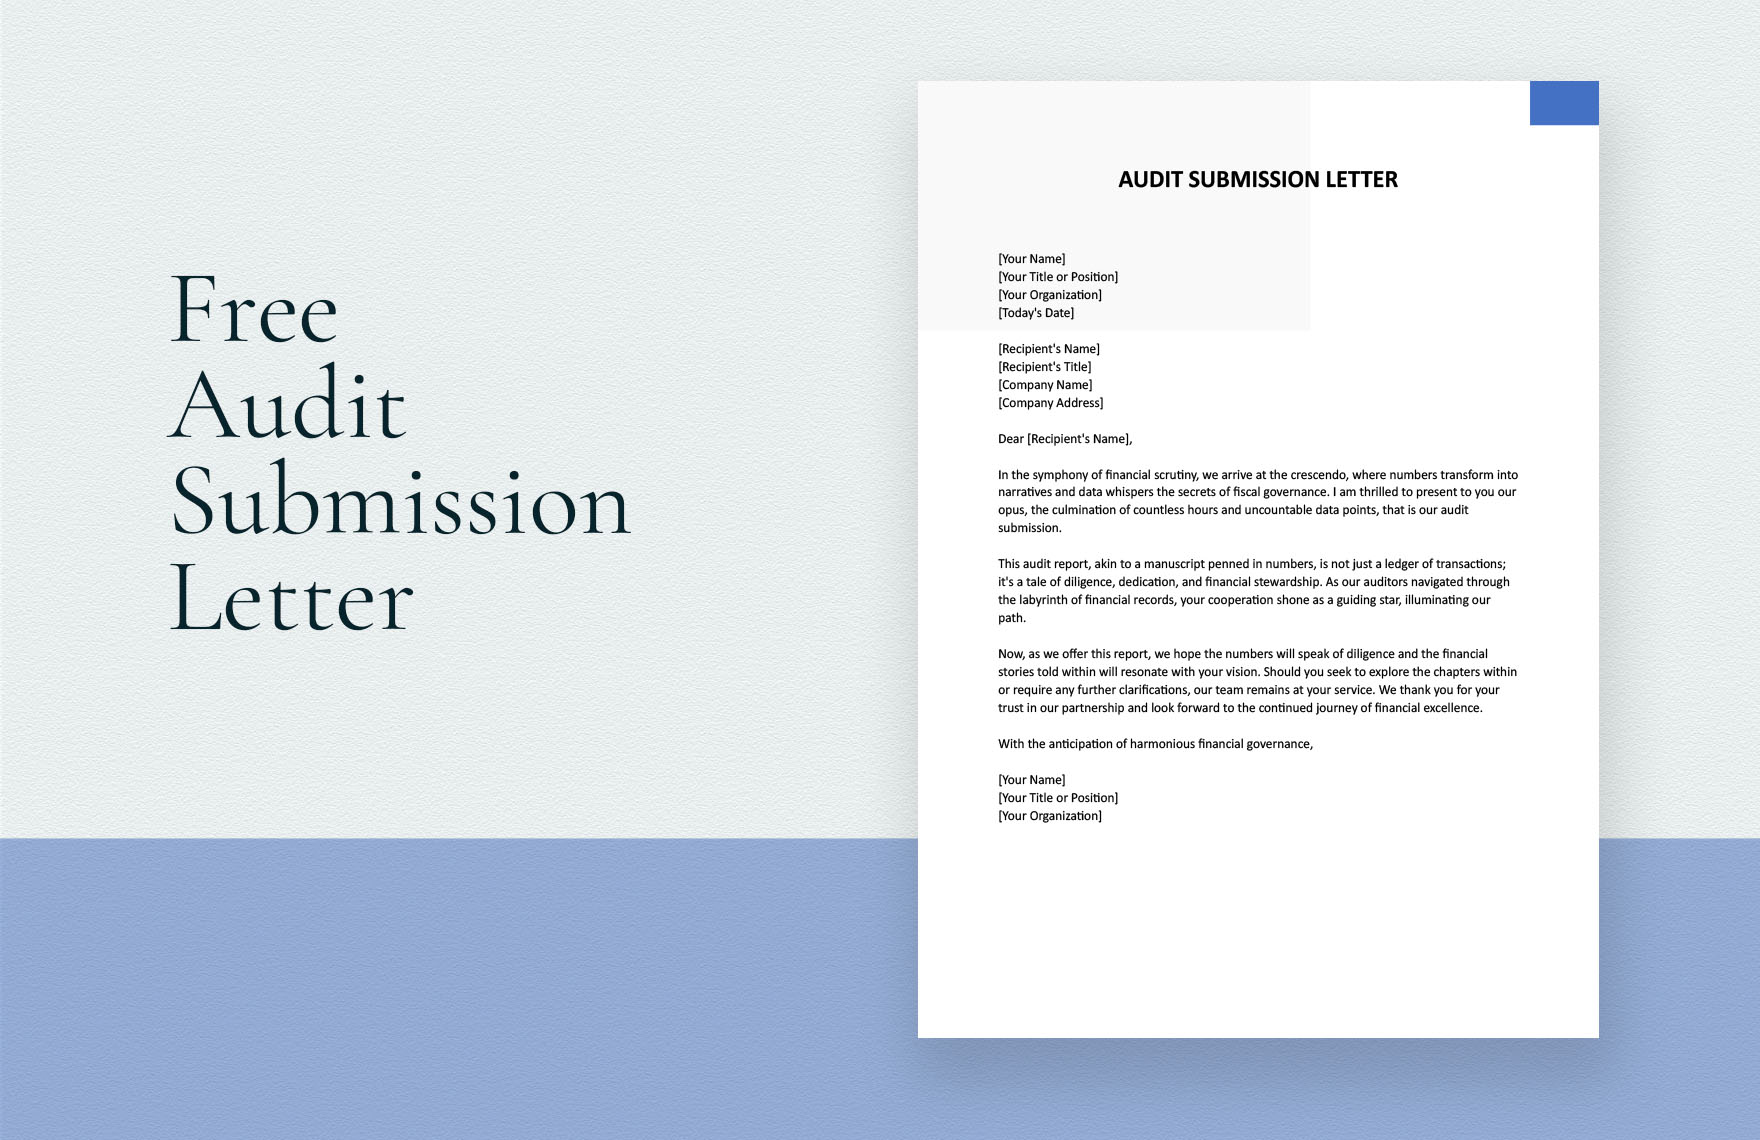 Audit Submission Letter in Word, Google Docs